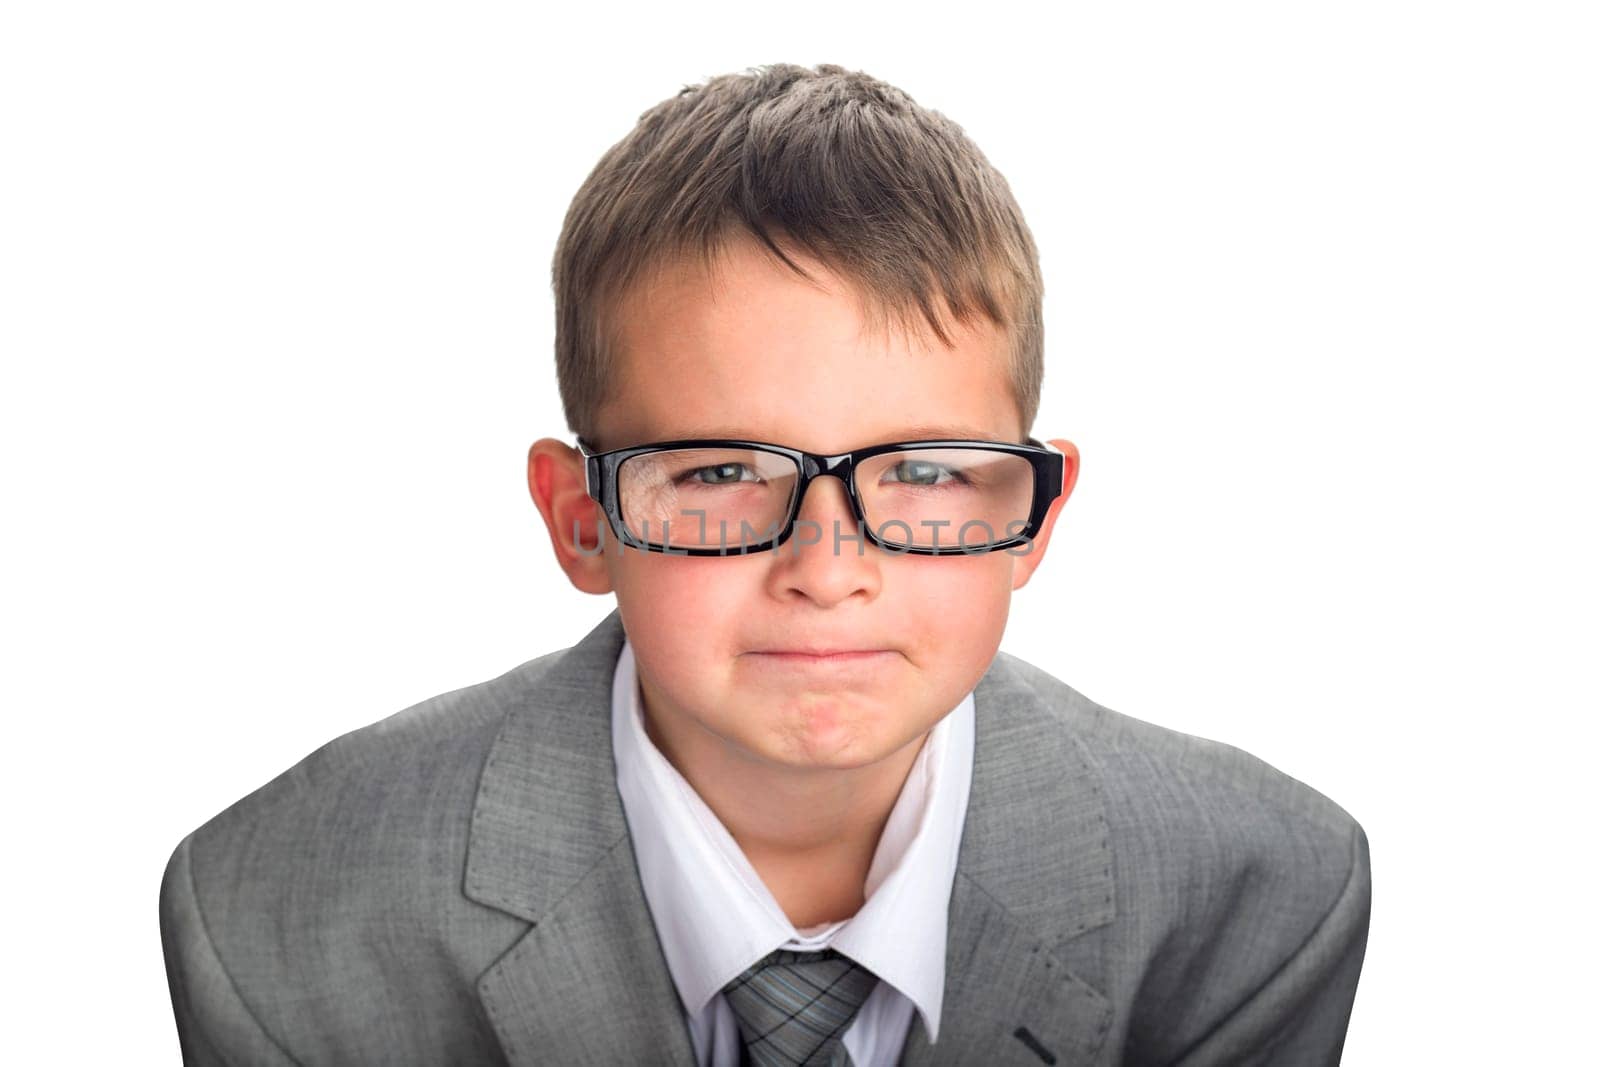 Portrait of serious child dressed in business suit and glasses as businessman. by andreyz